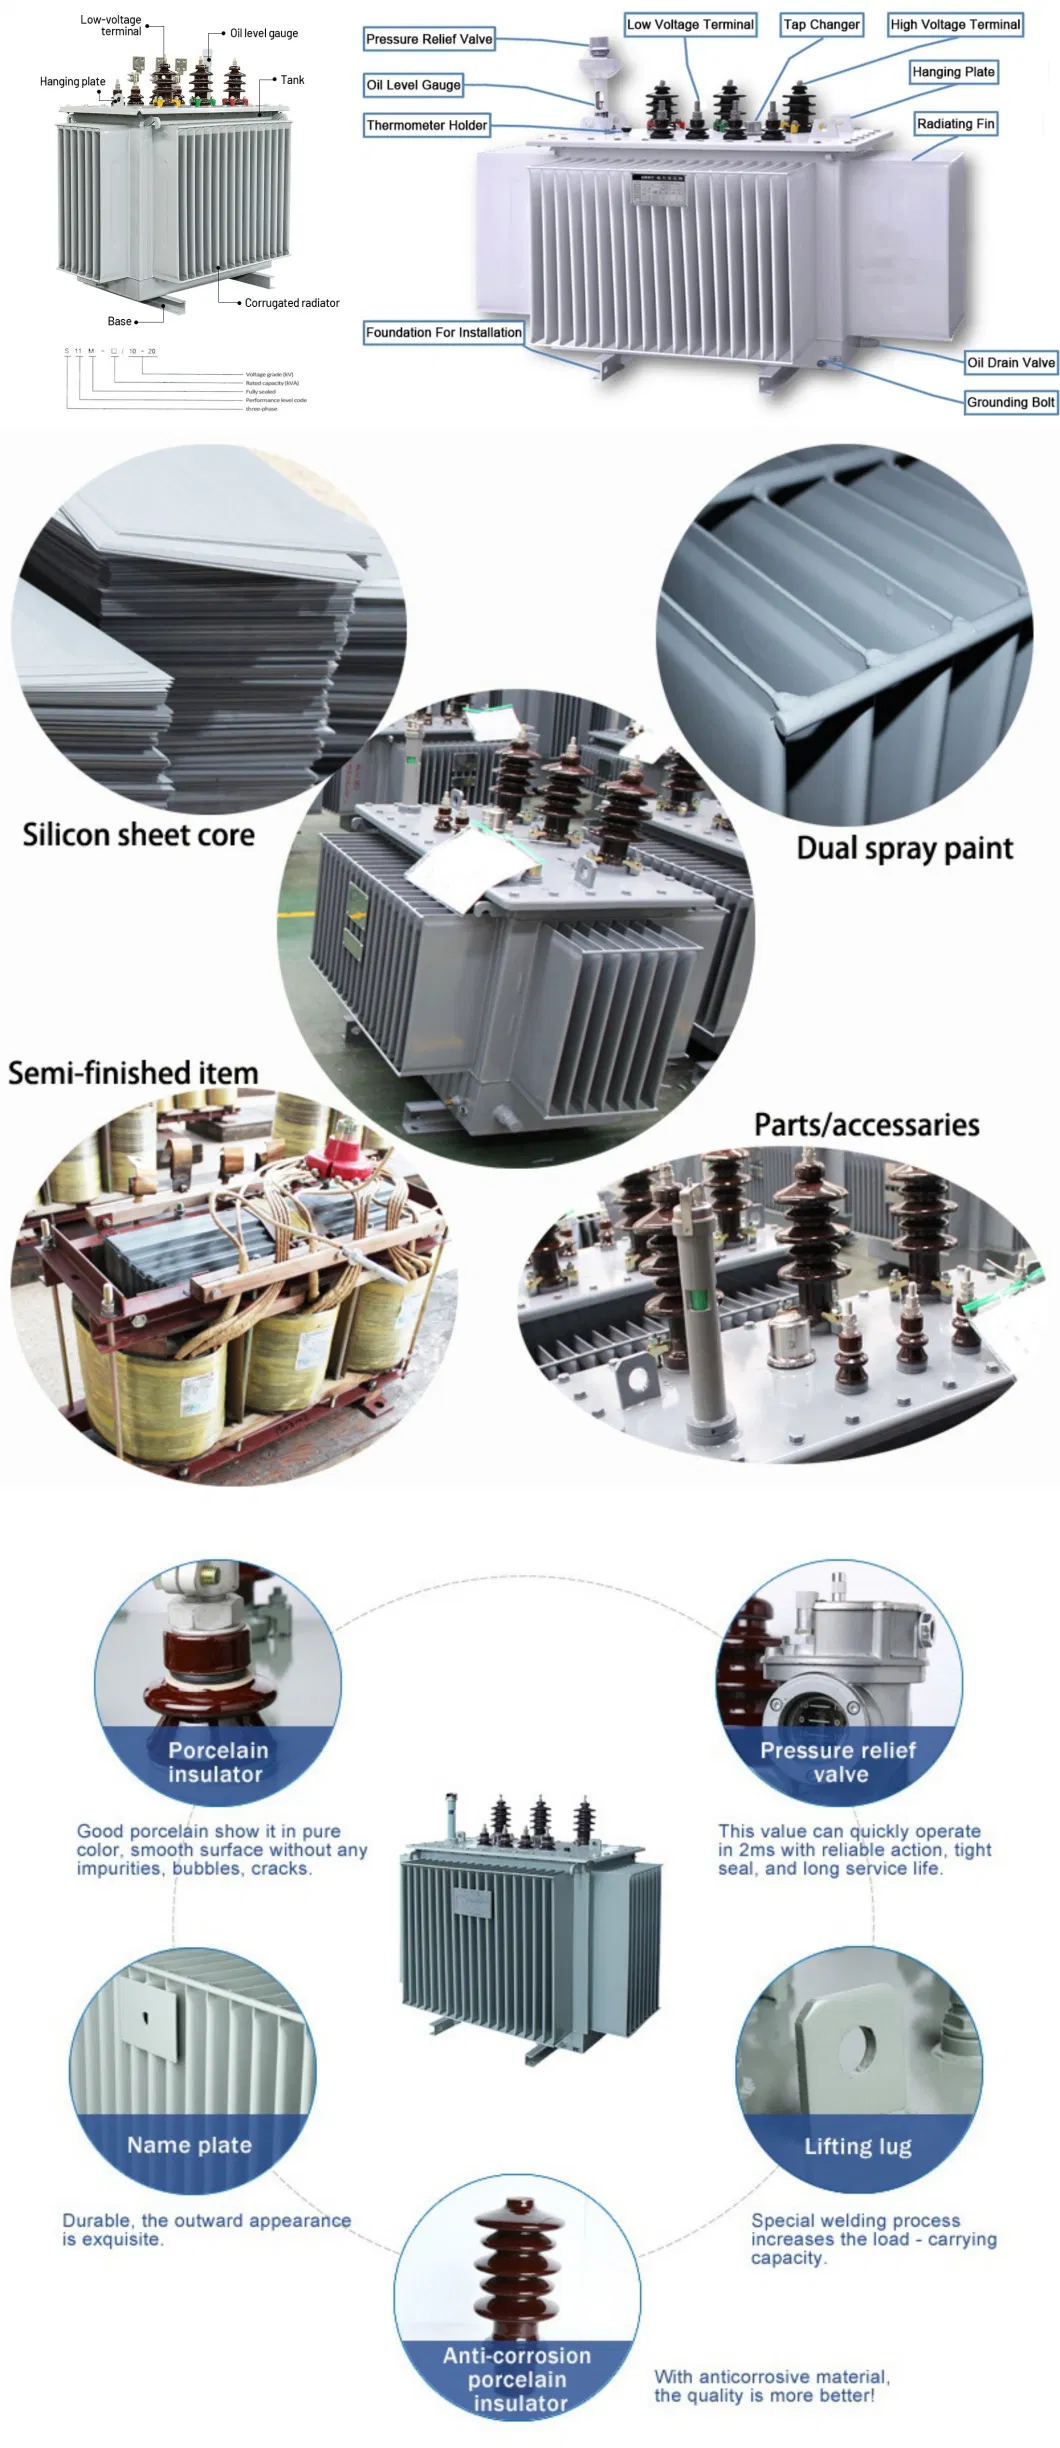 S11 Series 10kv Power Distribution Three-Phase Electric Transformer with Oil Immersed High Voltage Onan Rectifiers Current High Frequency Dry Type Transformer